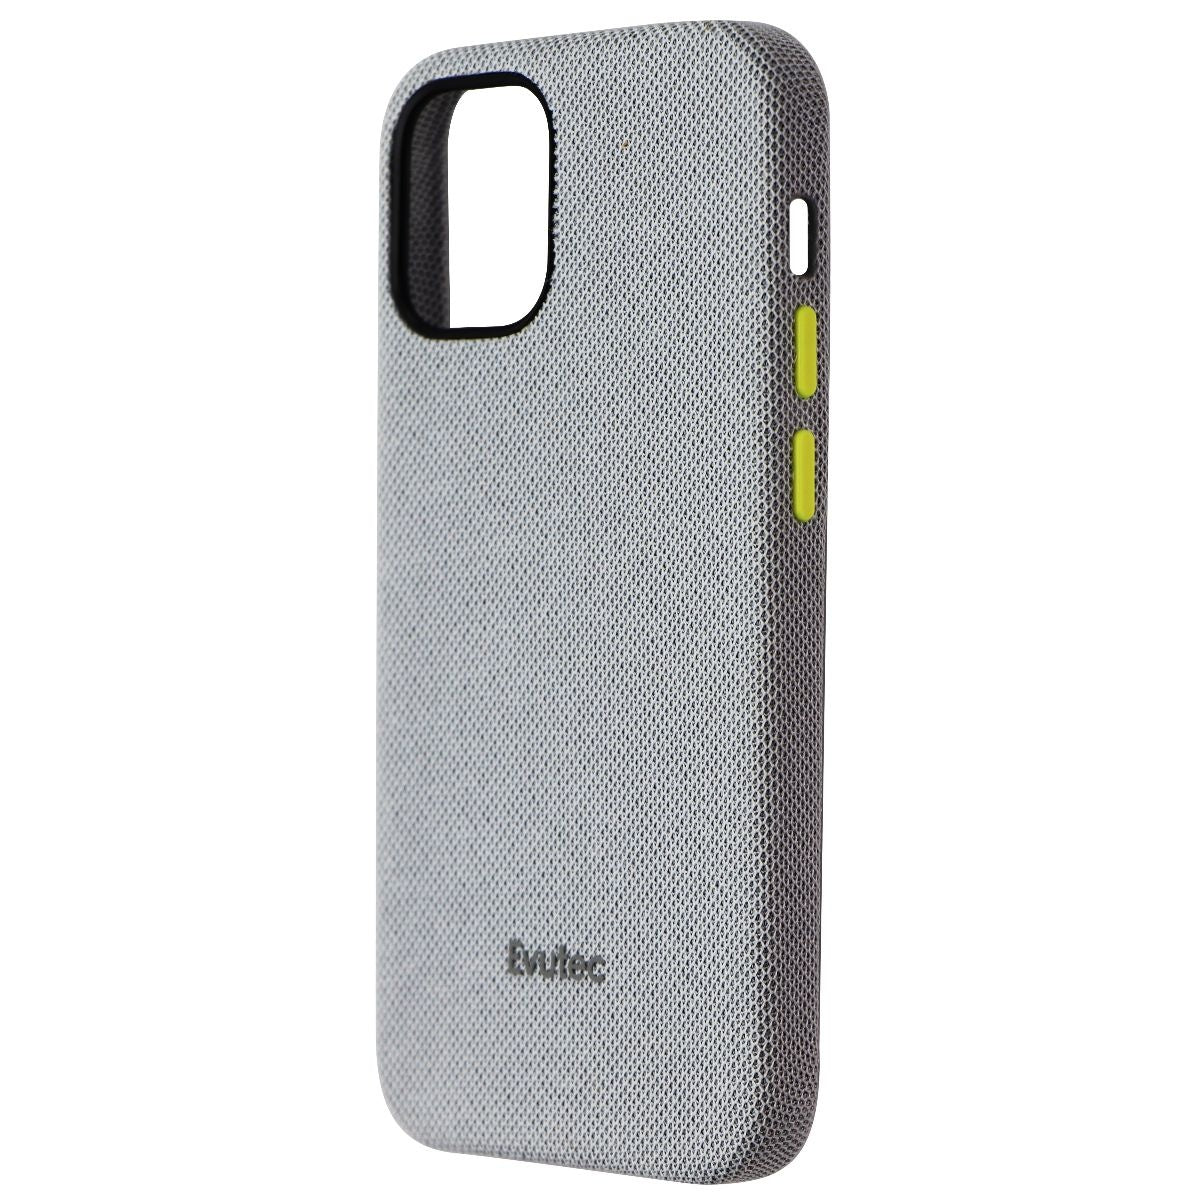 Evutec Rigid Fabric Case for Apple iPhone 12 mini - Gray/Yellow Cell Phone - Cases, Covers & Skins Evutec    - Simple Cell Bulk Wholesale Pricing - USA Seller